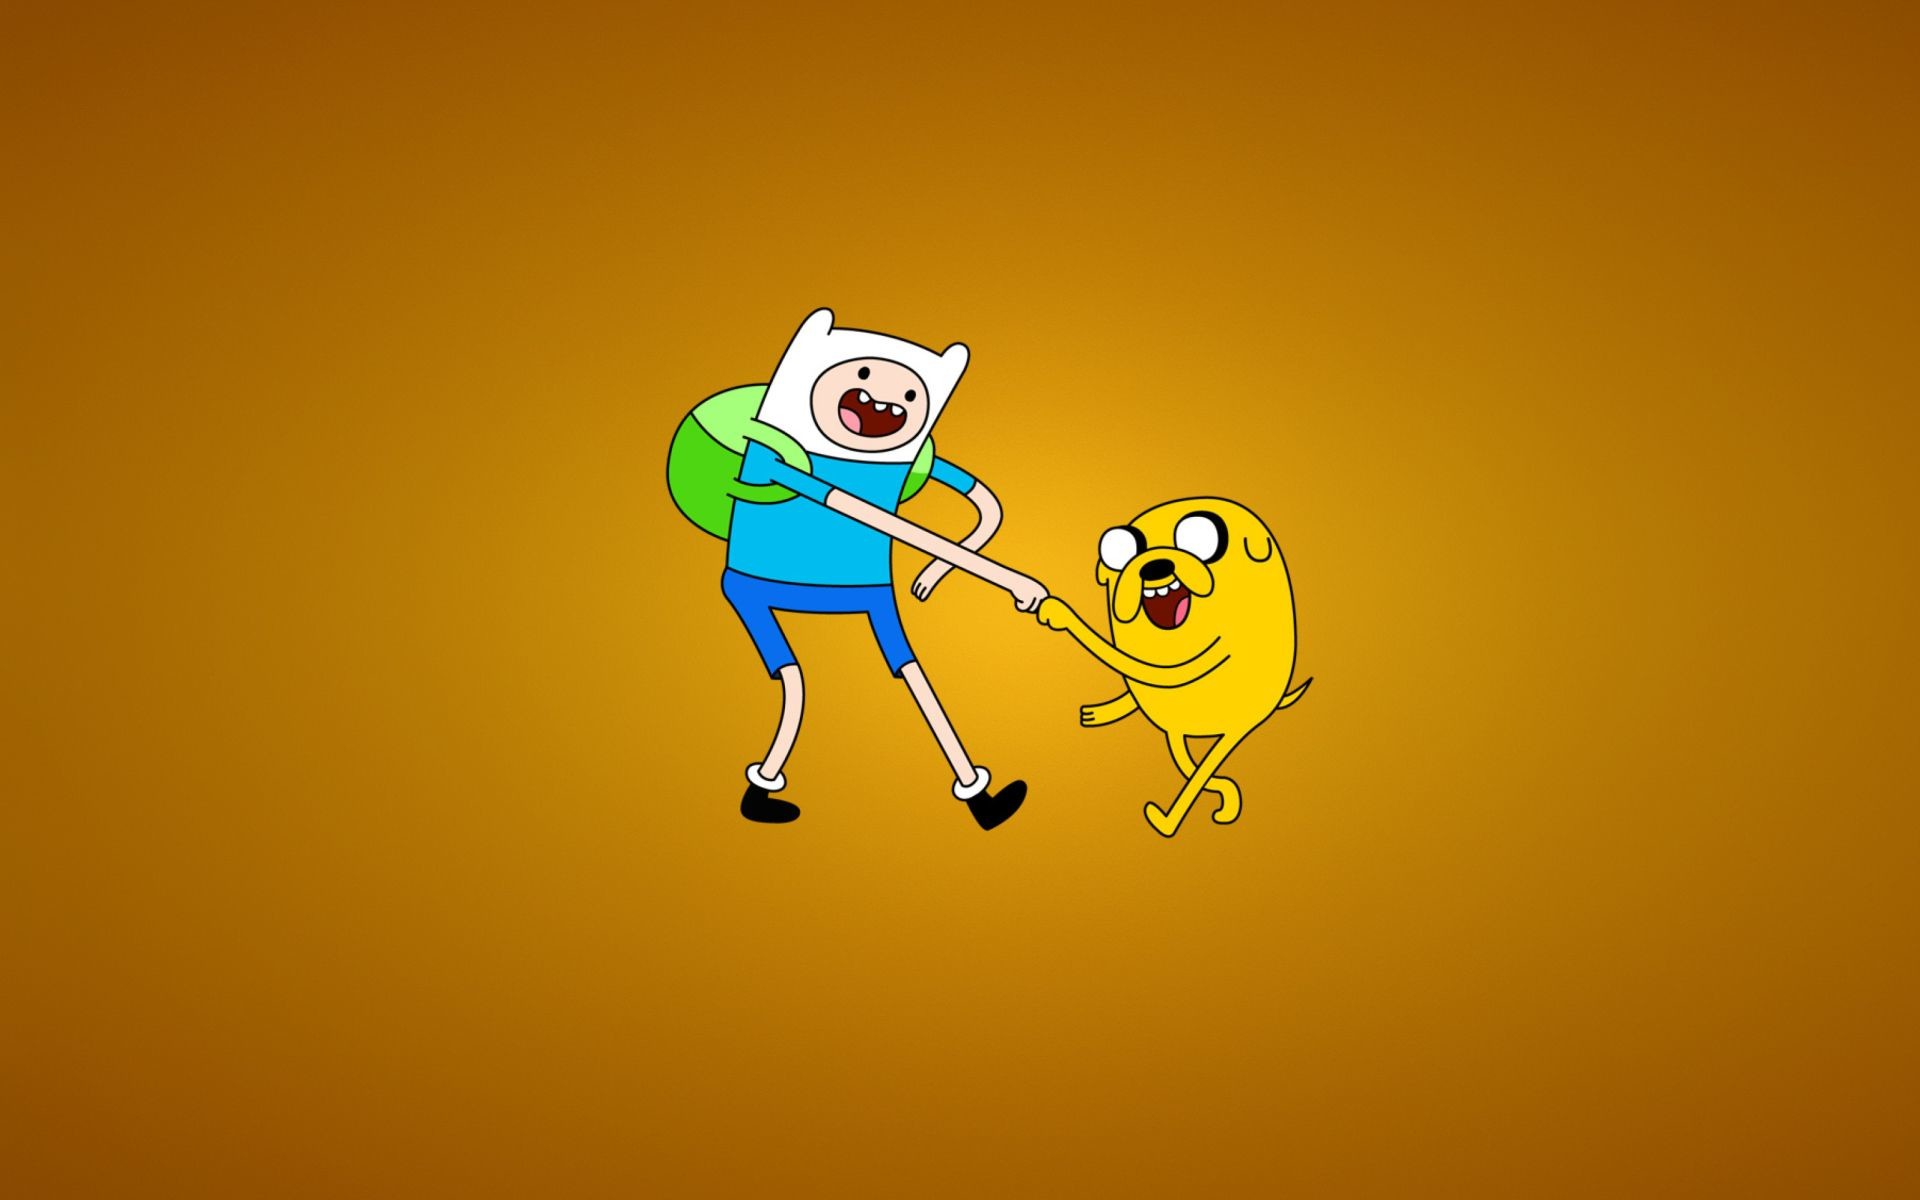 1920x1200 Adventure Time Wallpapers for Widescreen Desktop PC 1920x1080 Full HD